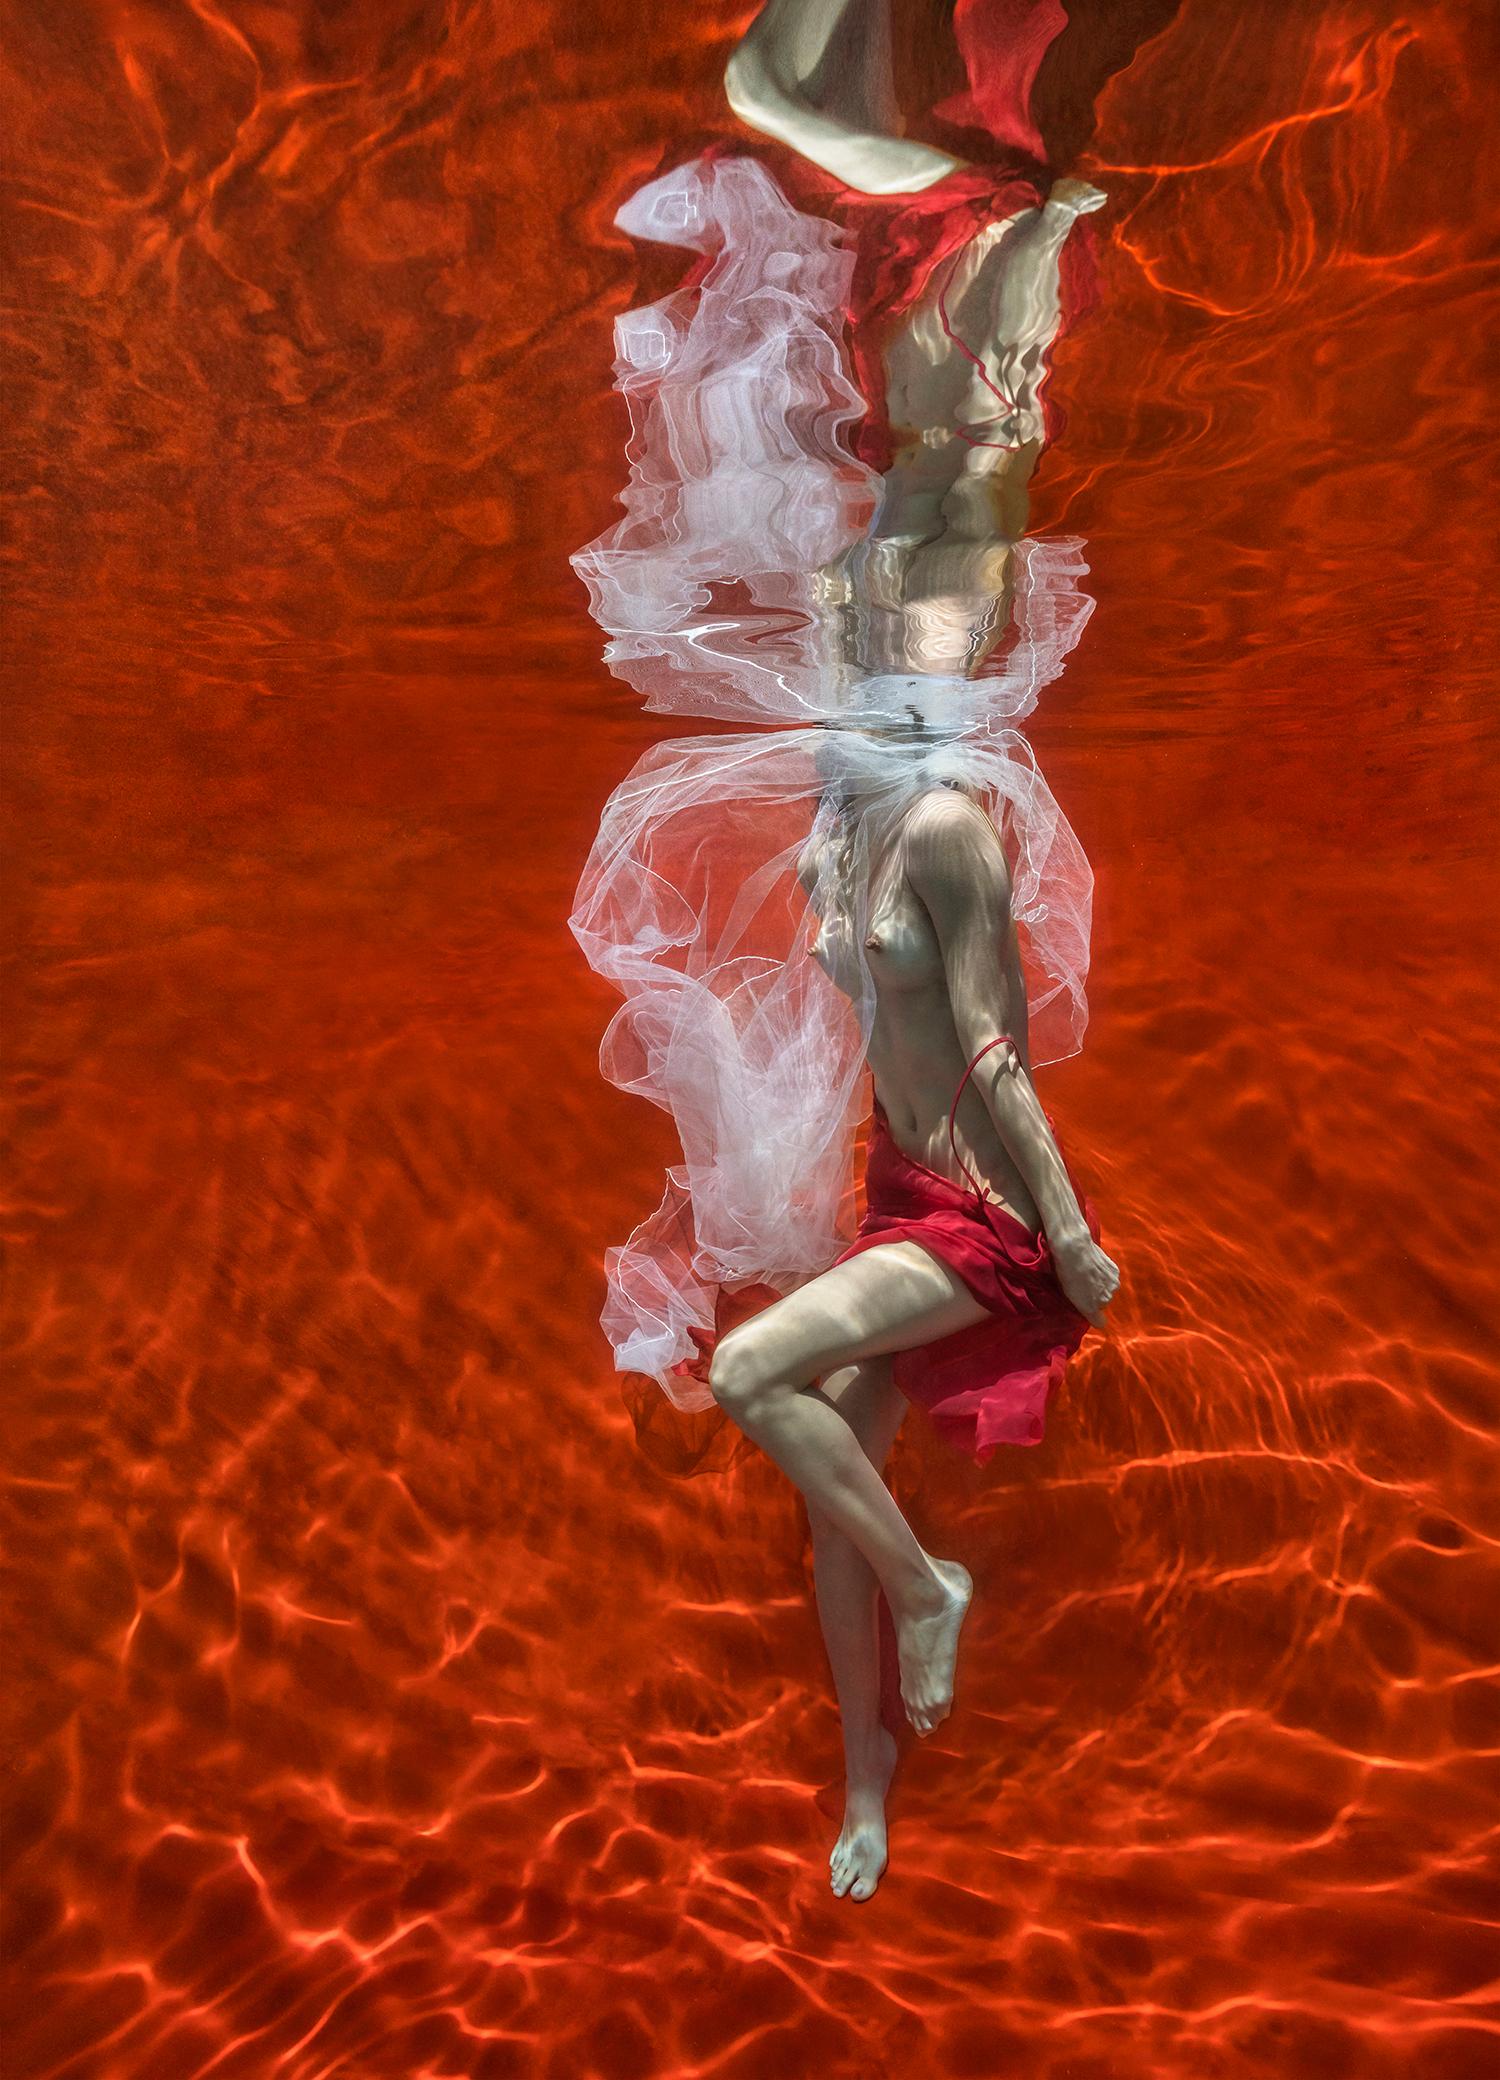 Alex Sher Nude Photograph - Blood and Milk III - underwater nude photograph - print on paper 60x43"